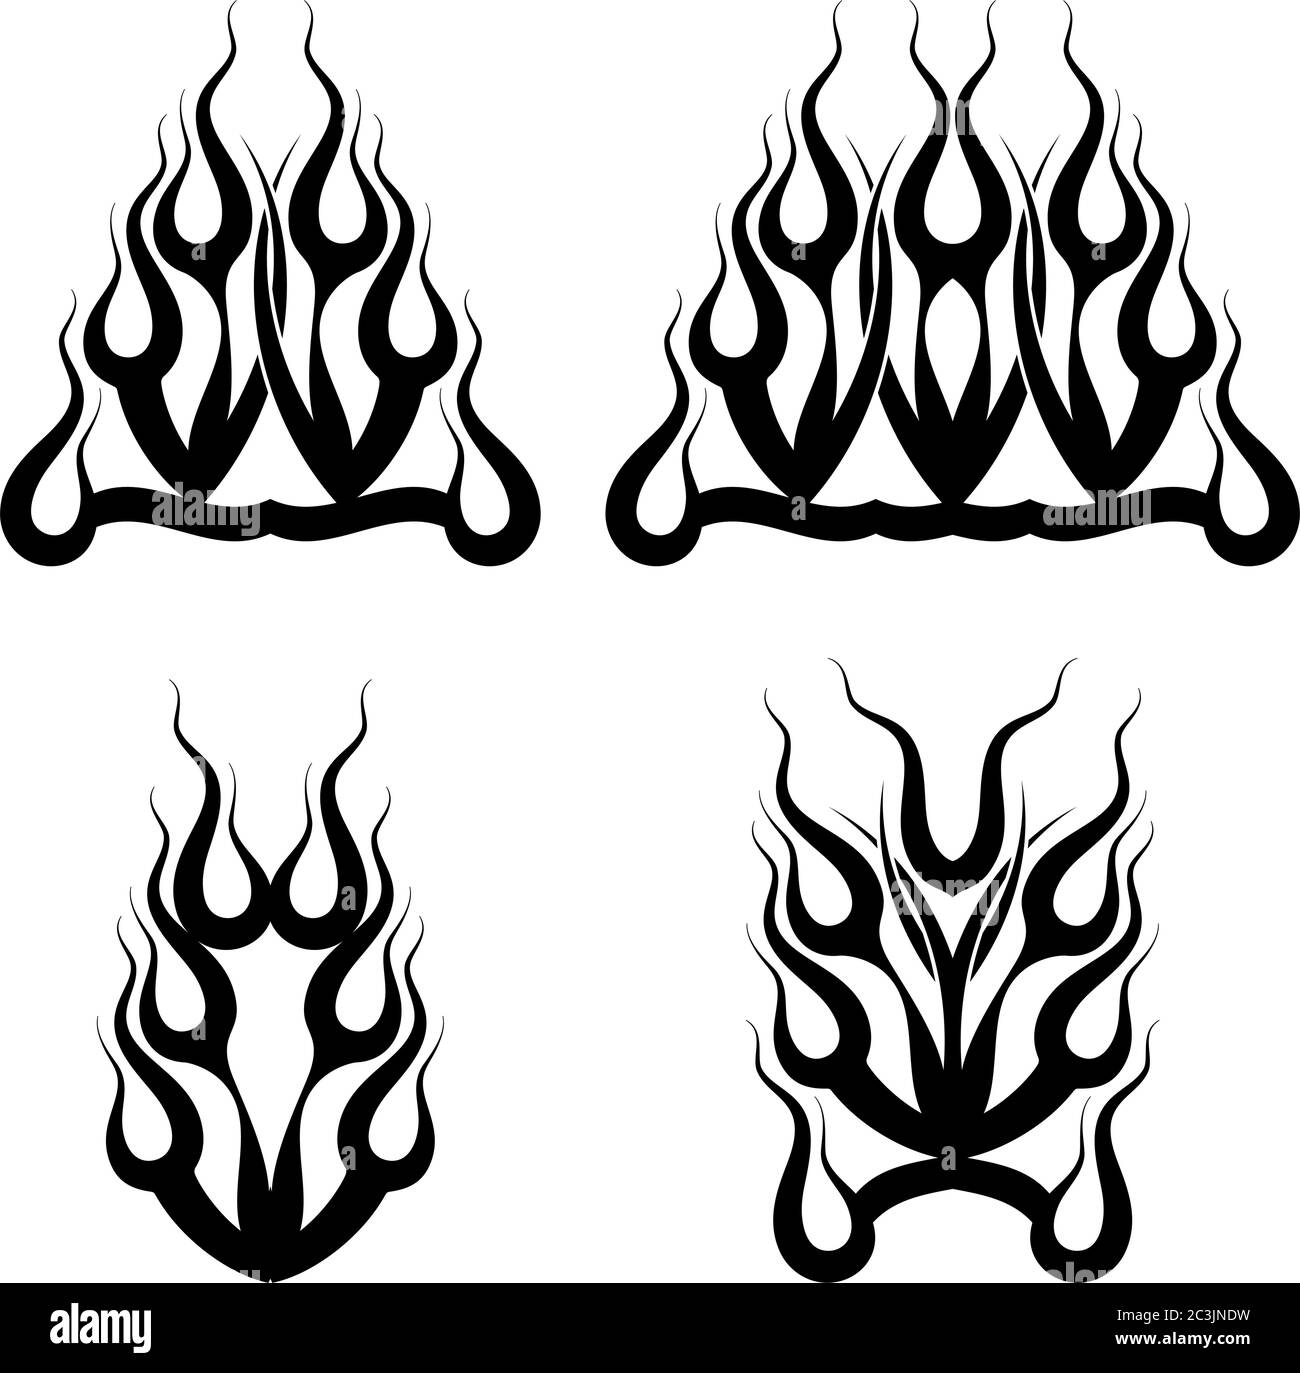 Tattoo Fire Flames Designs Simple Man Stock Vector (Royalty Free) 524516695  | Shutterstock